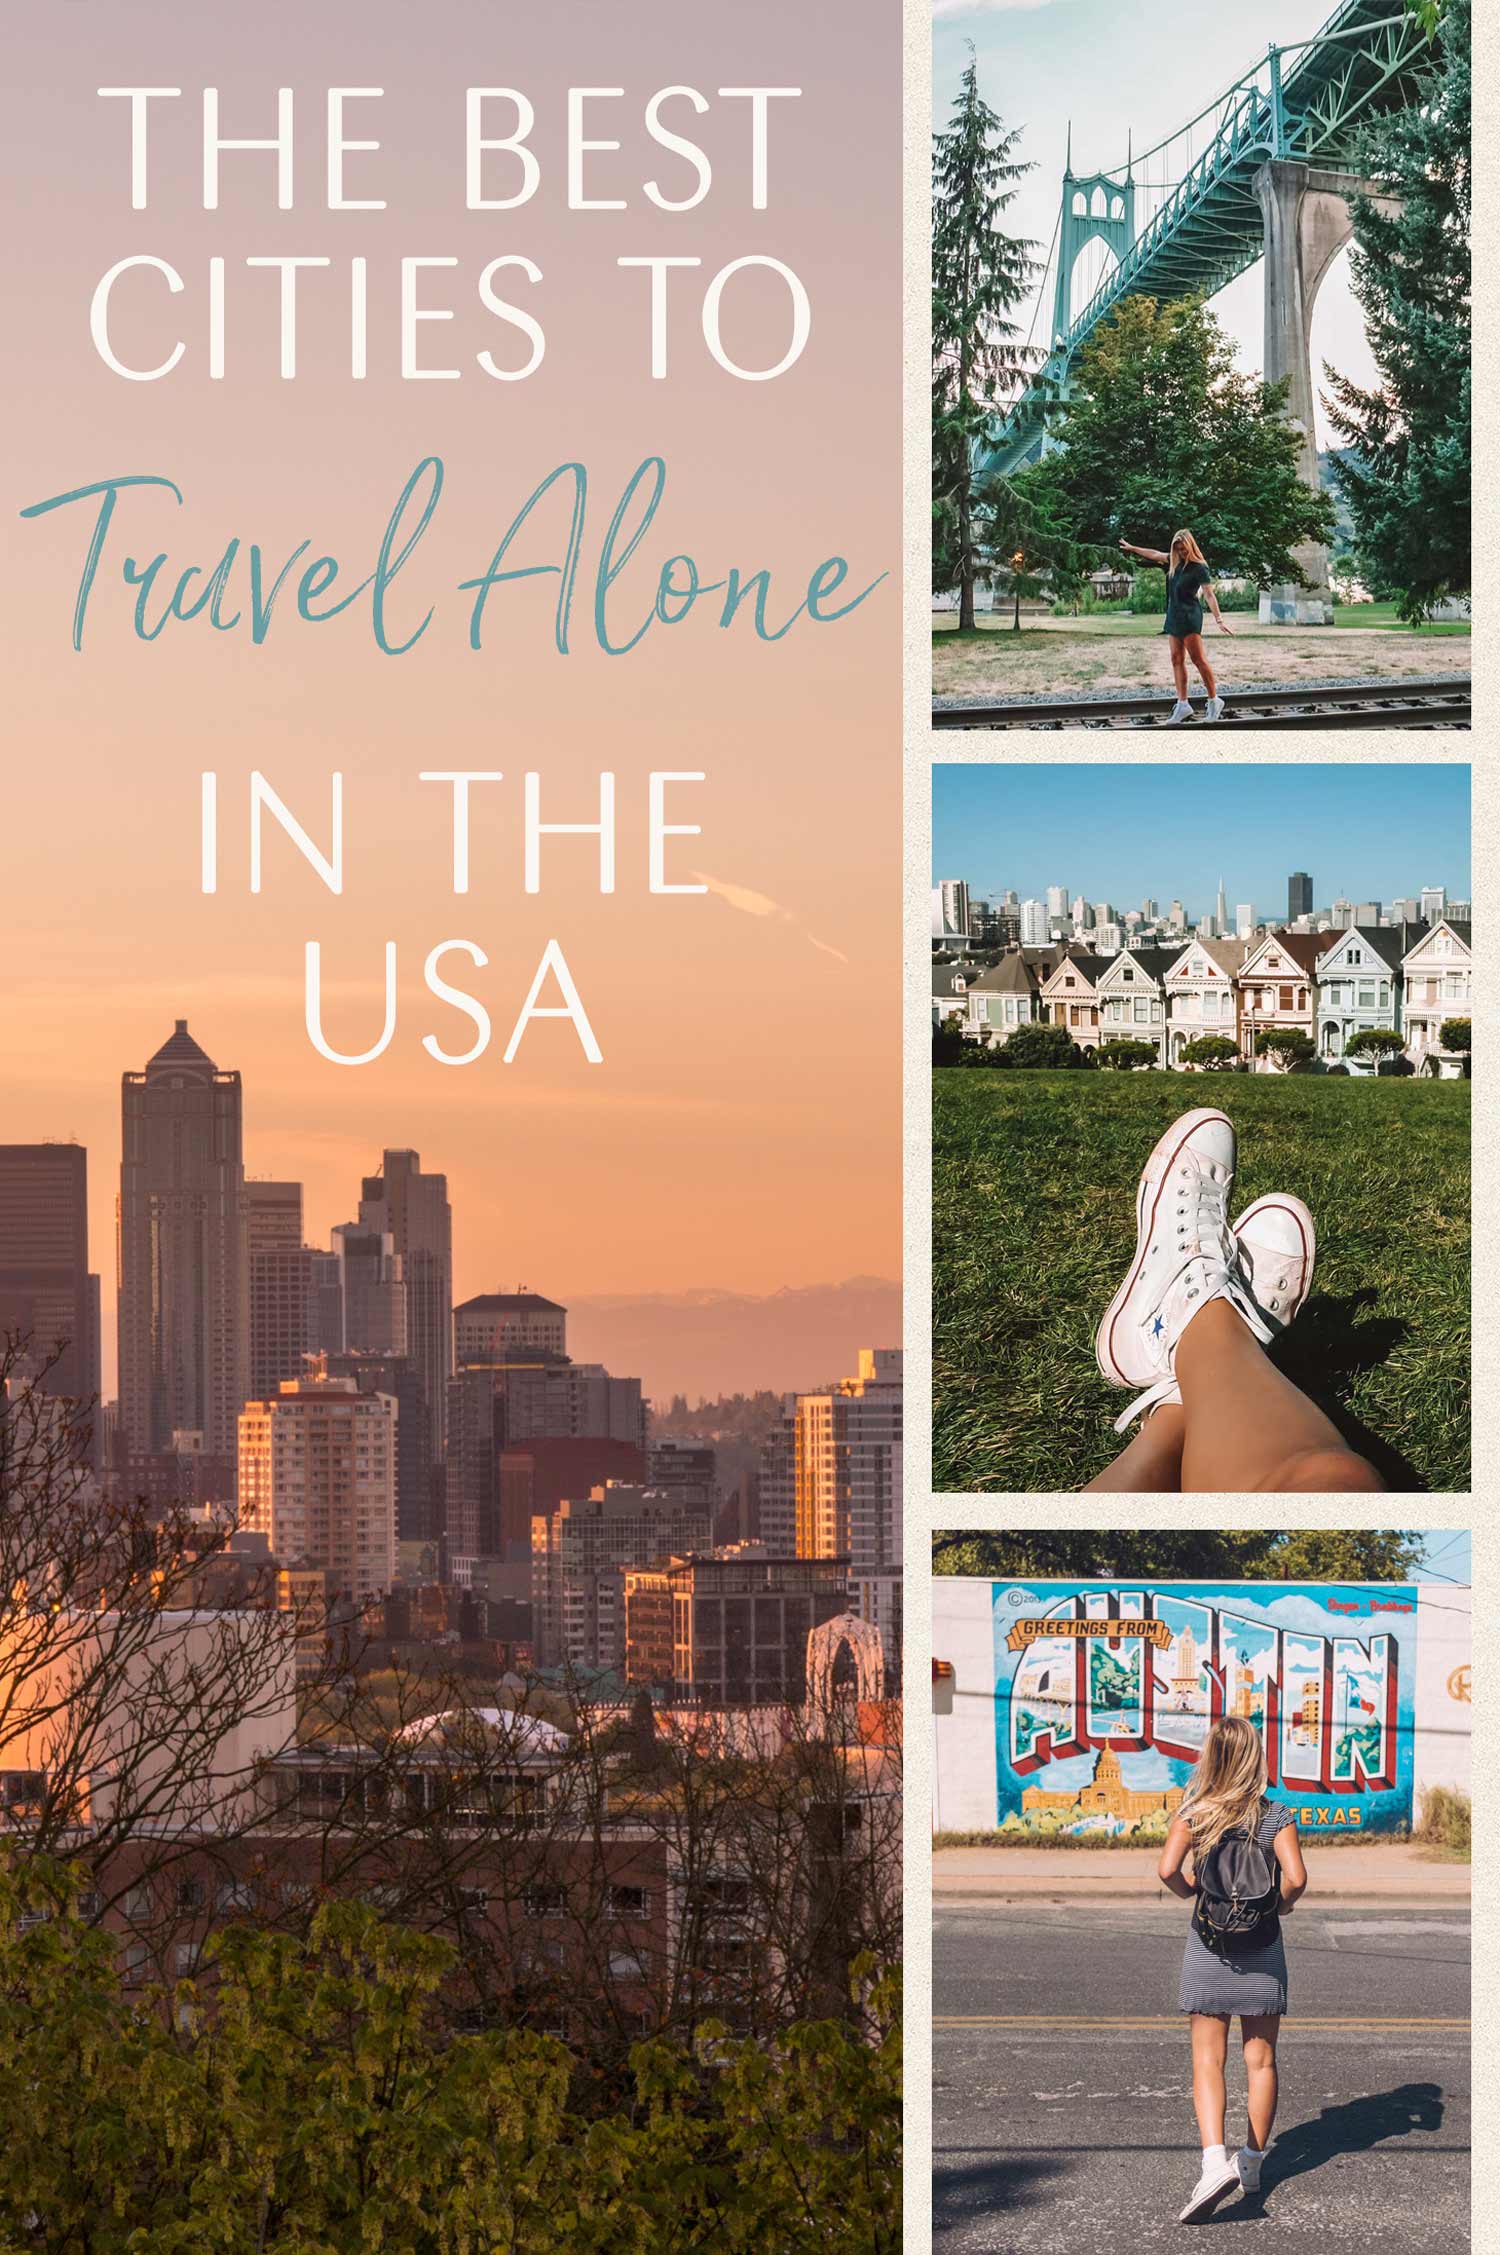 The Best Cities to Travel Alone in the USA